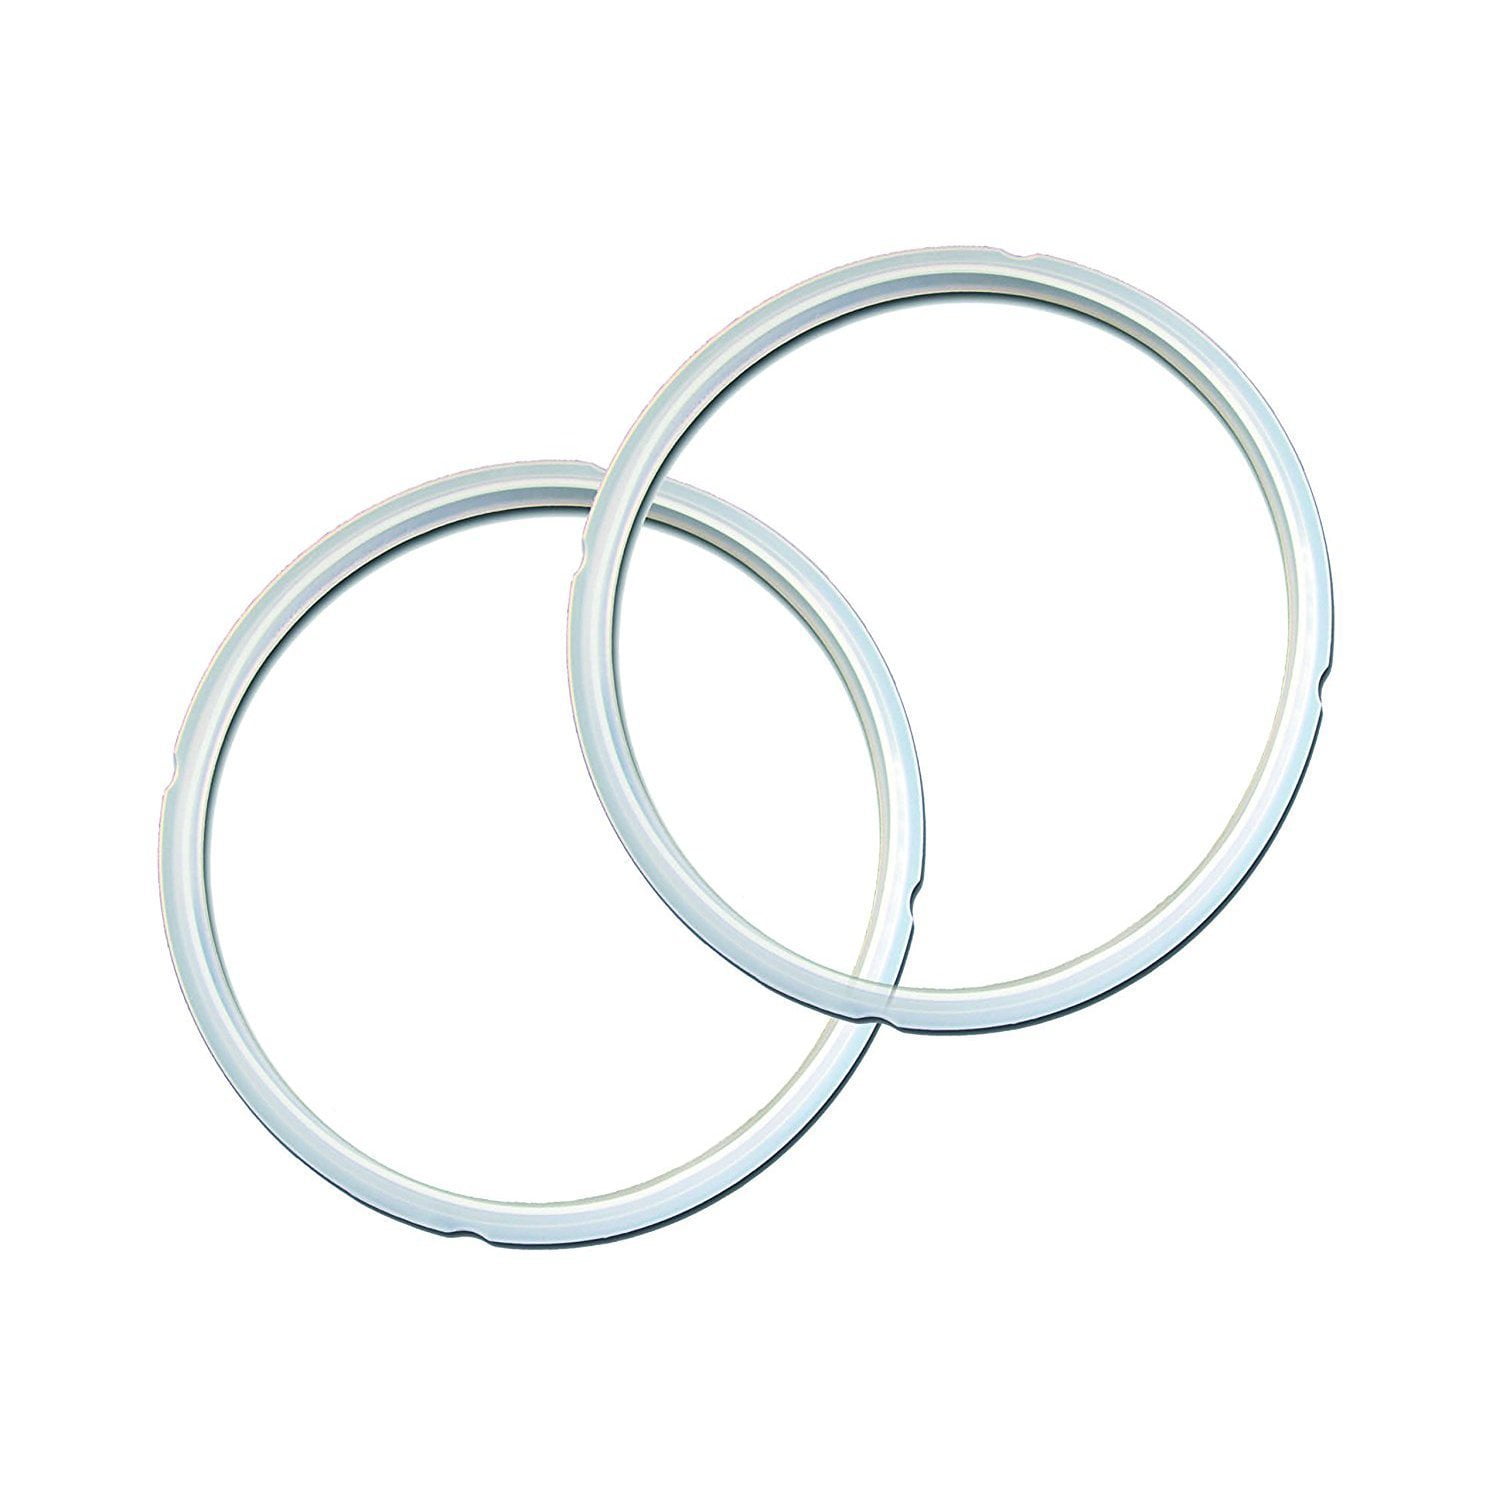 Sealing Ring for 6 Qt InstaPot - Replacement Silicone Gasket Seal Rings for  6 Quart IP Programmable Pressure Cooker - Insta-Pot Rubber Replacements